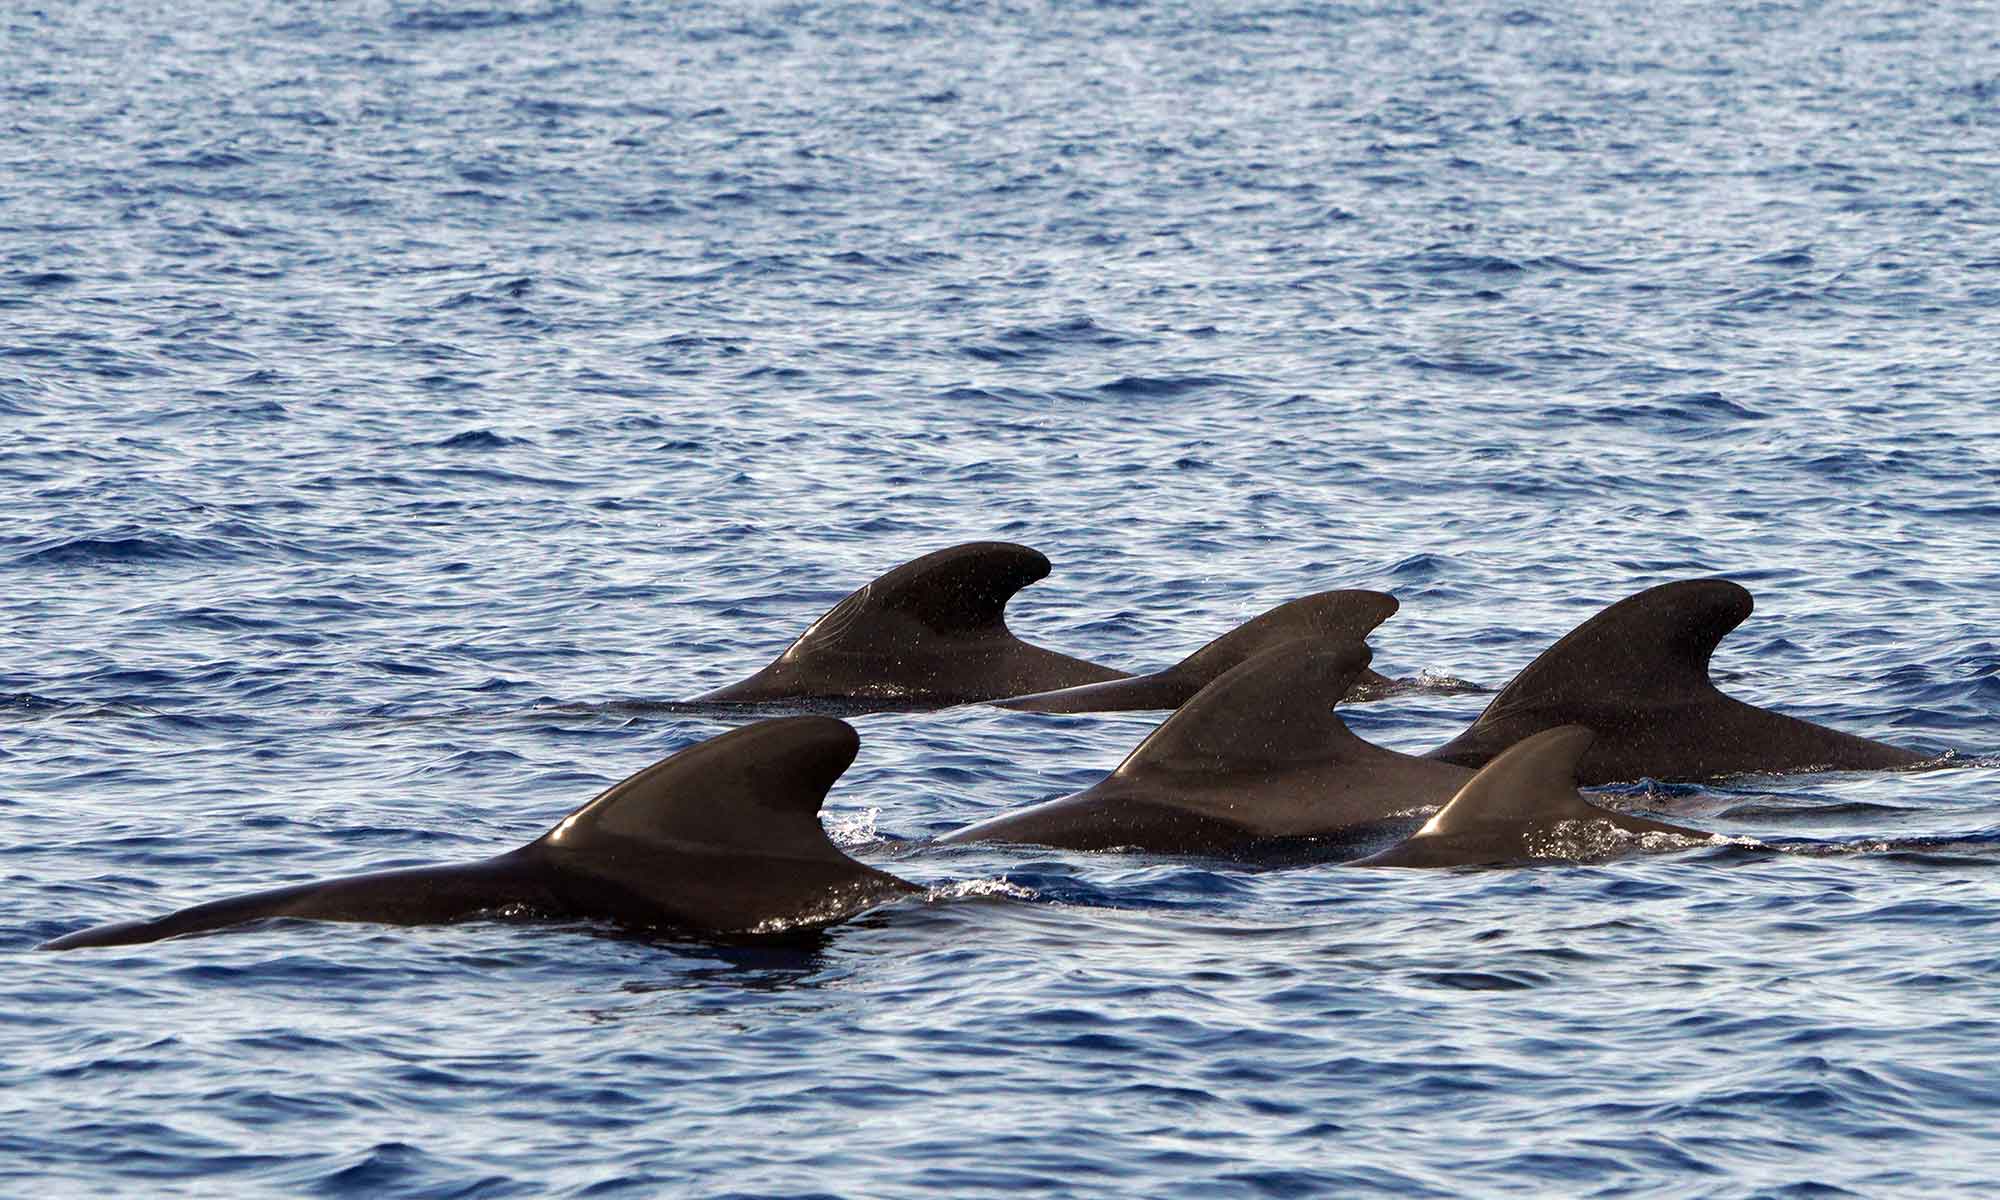 October was a great month to see large groups of Pilot whales in Madeira.